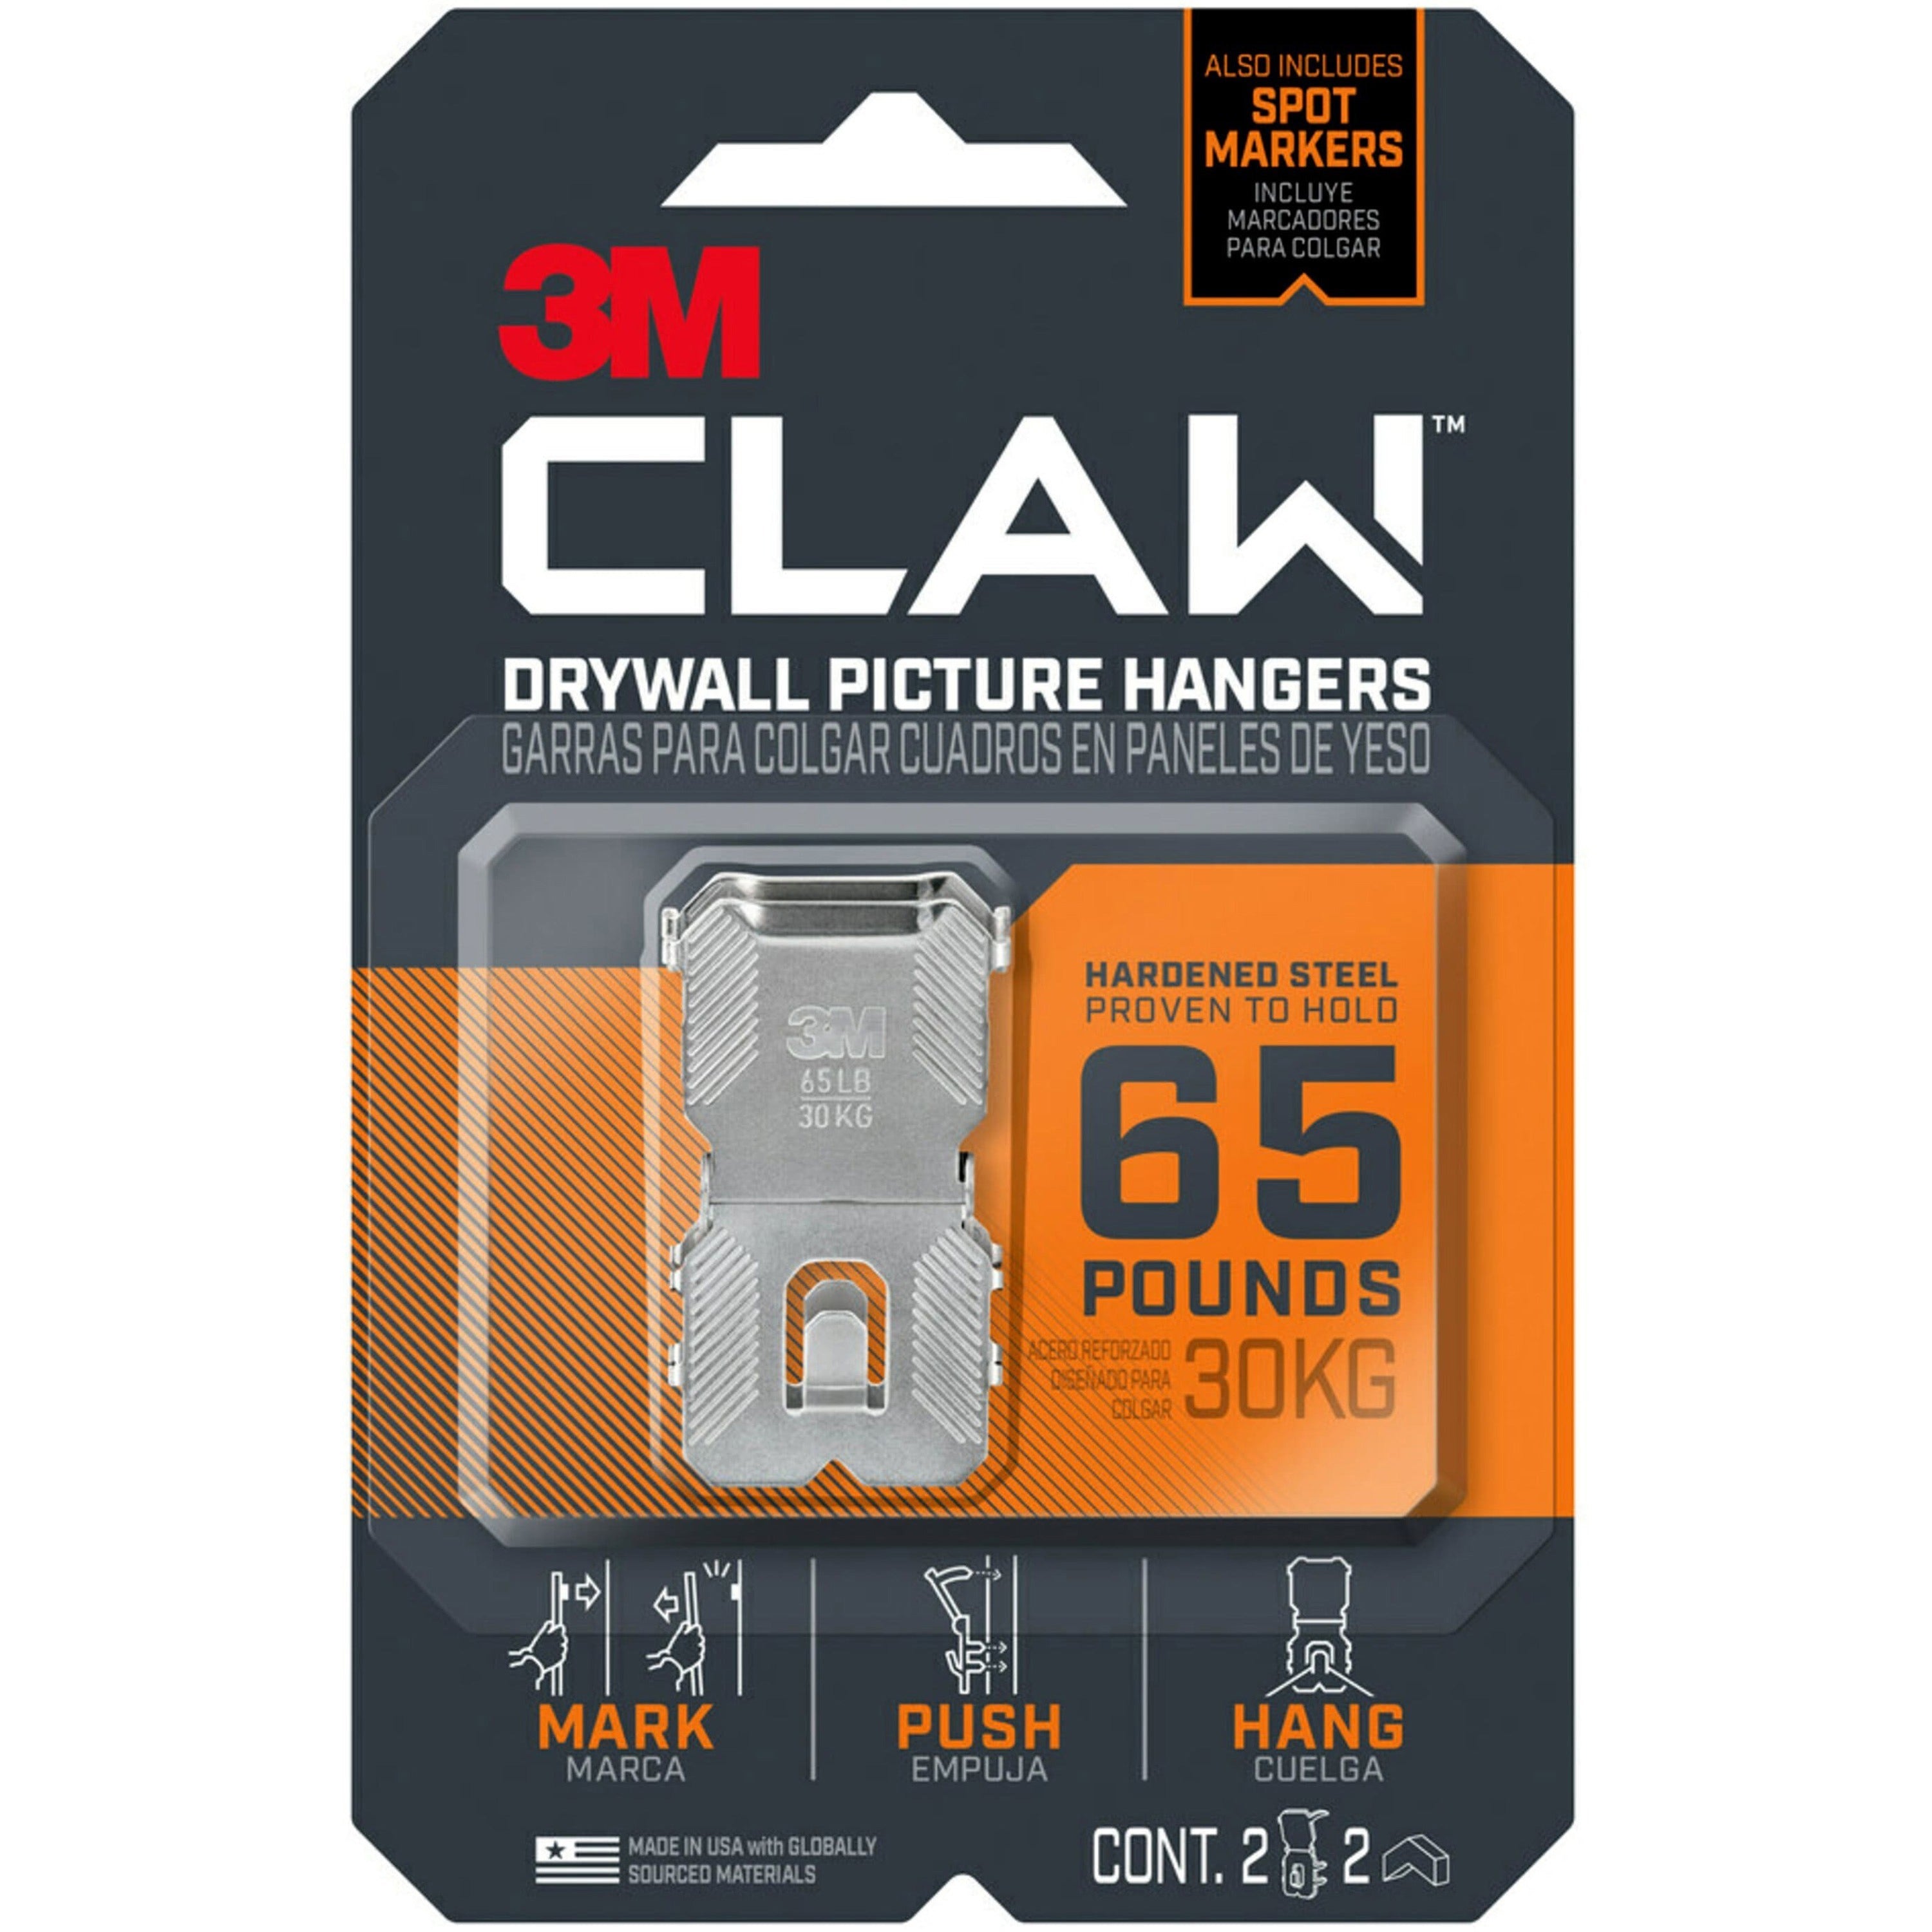 3m-claw-drywall-picture-hanger-65-lb-2948-kg-capacity-2-length-for-pictures-project-mirror-frame-home-decoration-steel-gray-2-pack_mmm3ph65m2es - 1